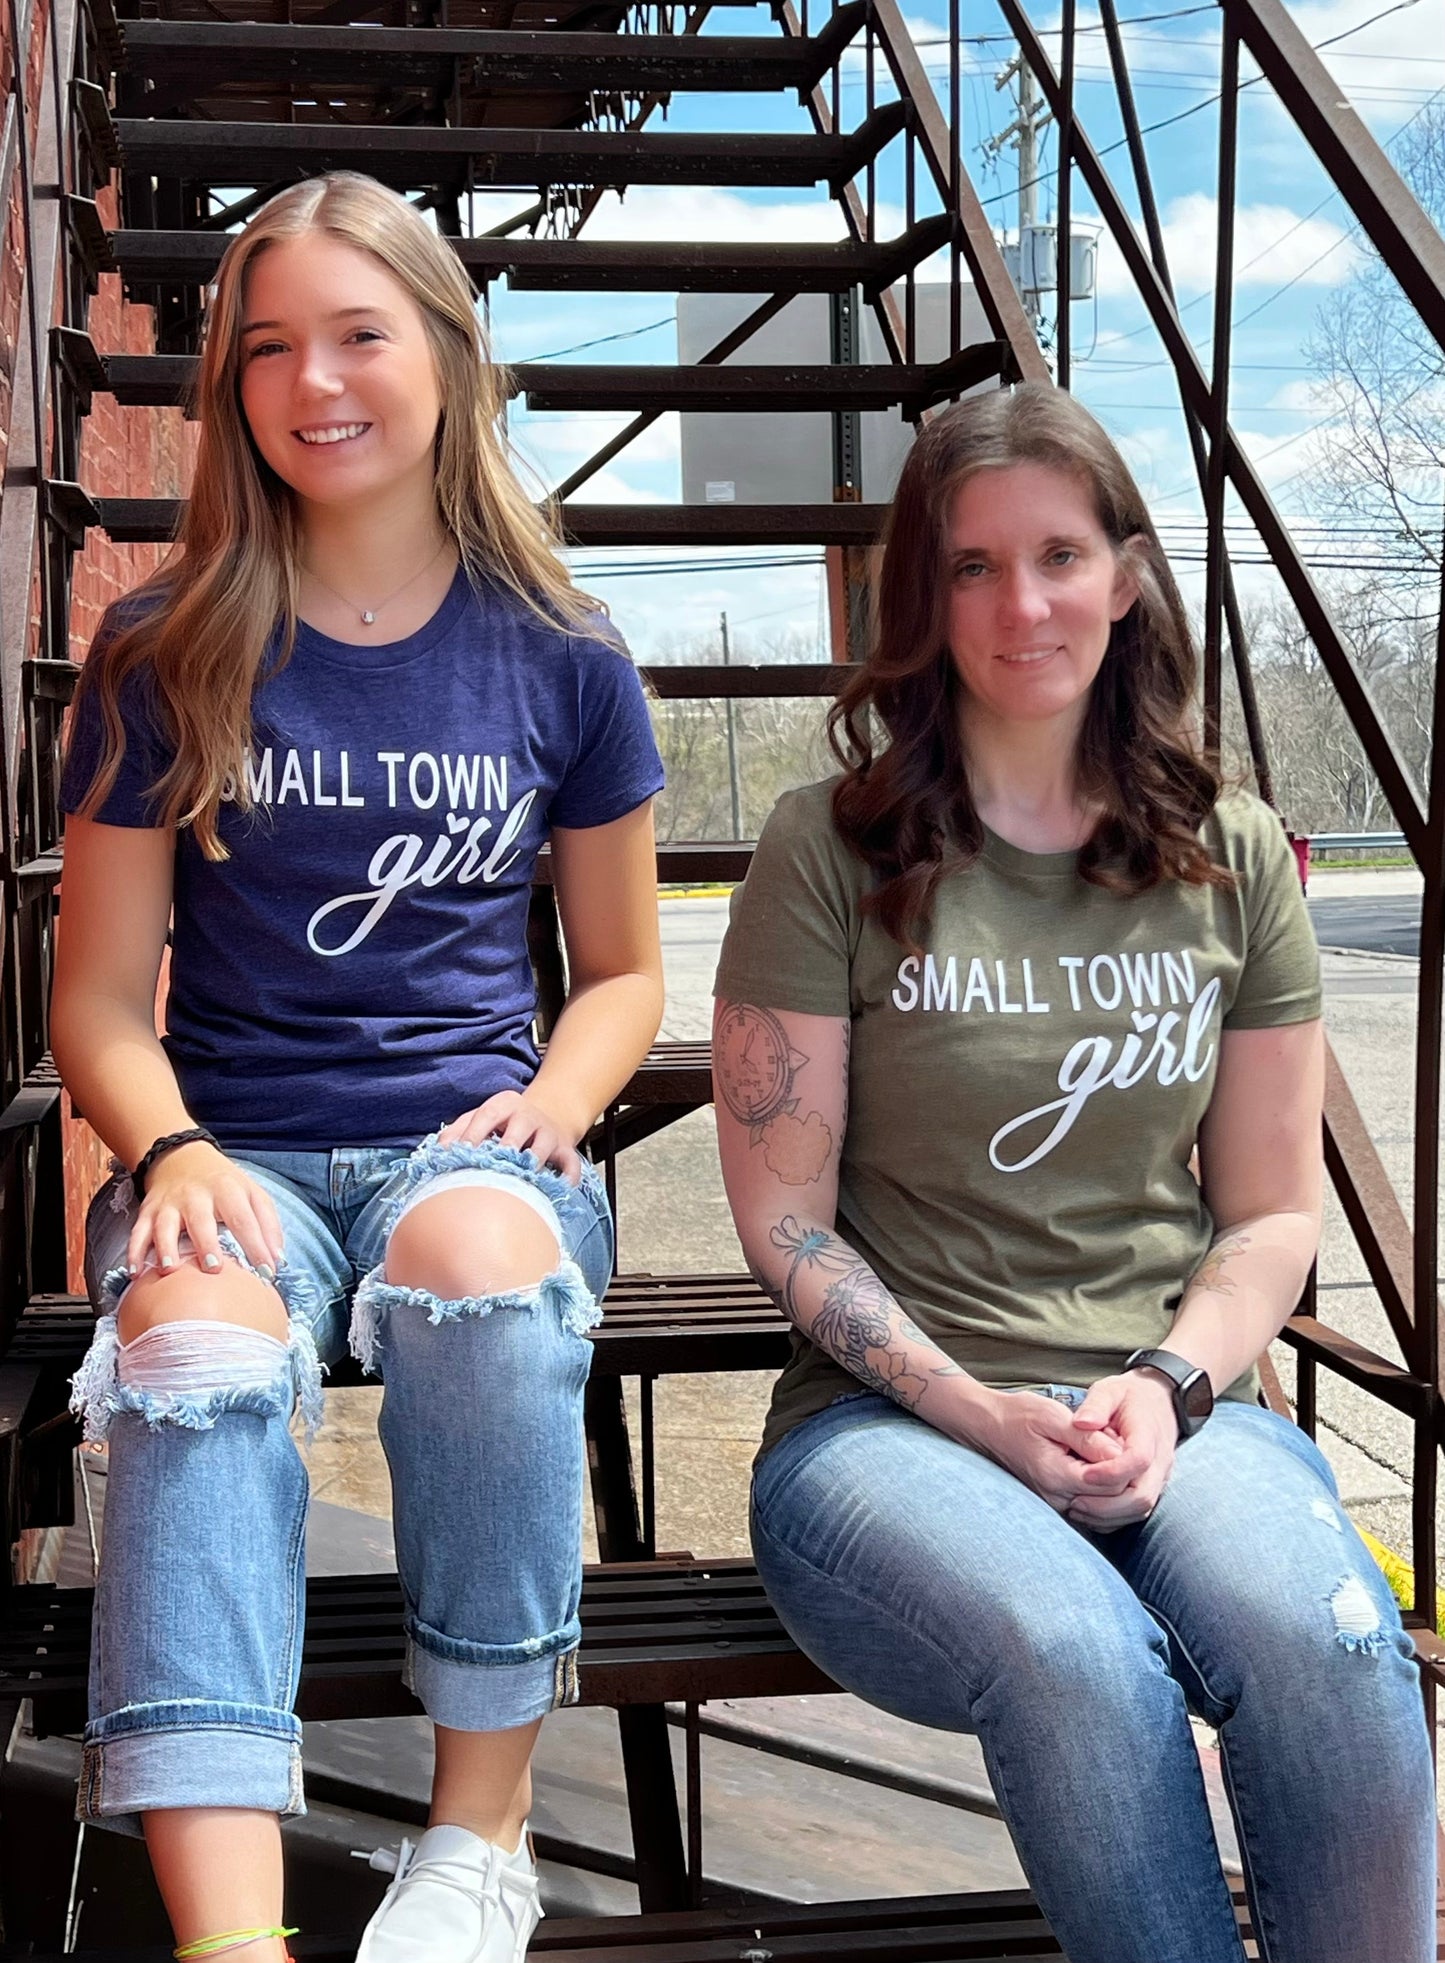 Small Town Girl Graphic